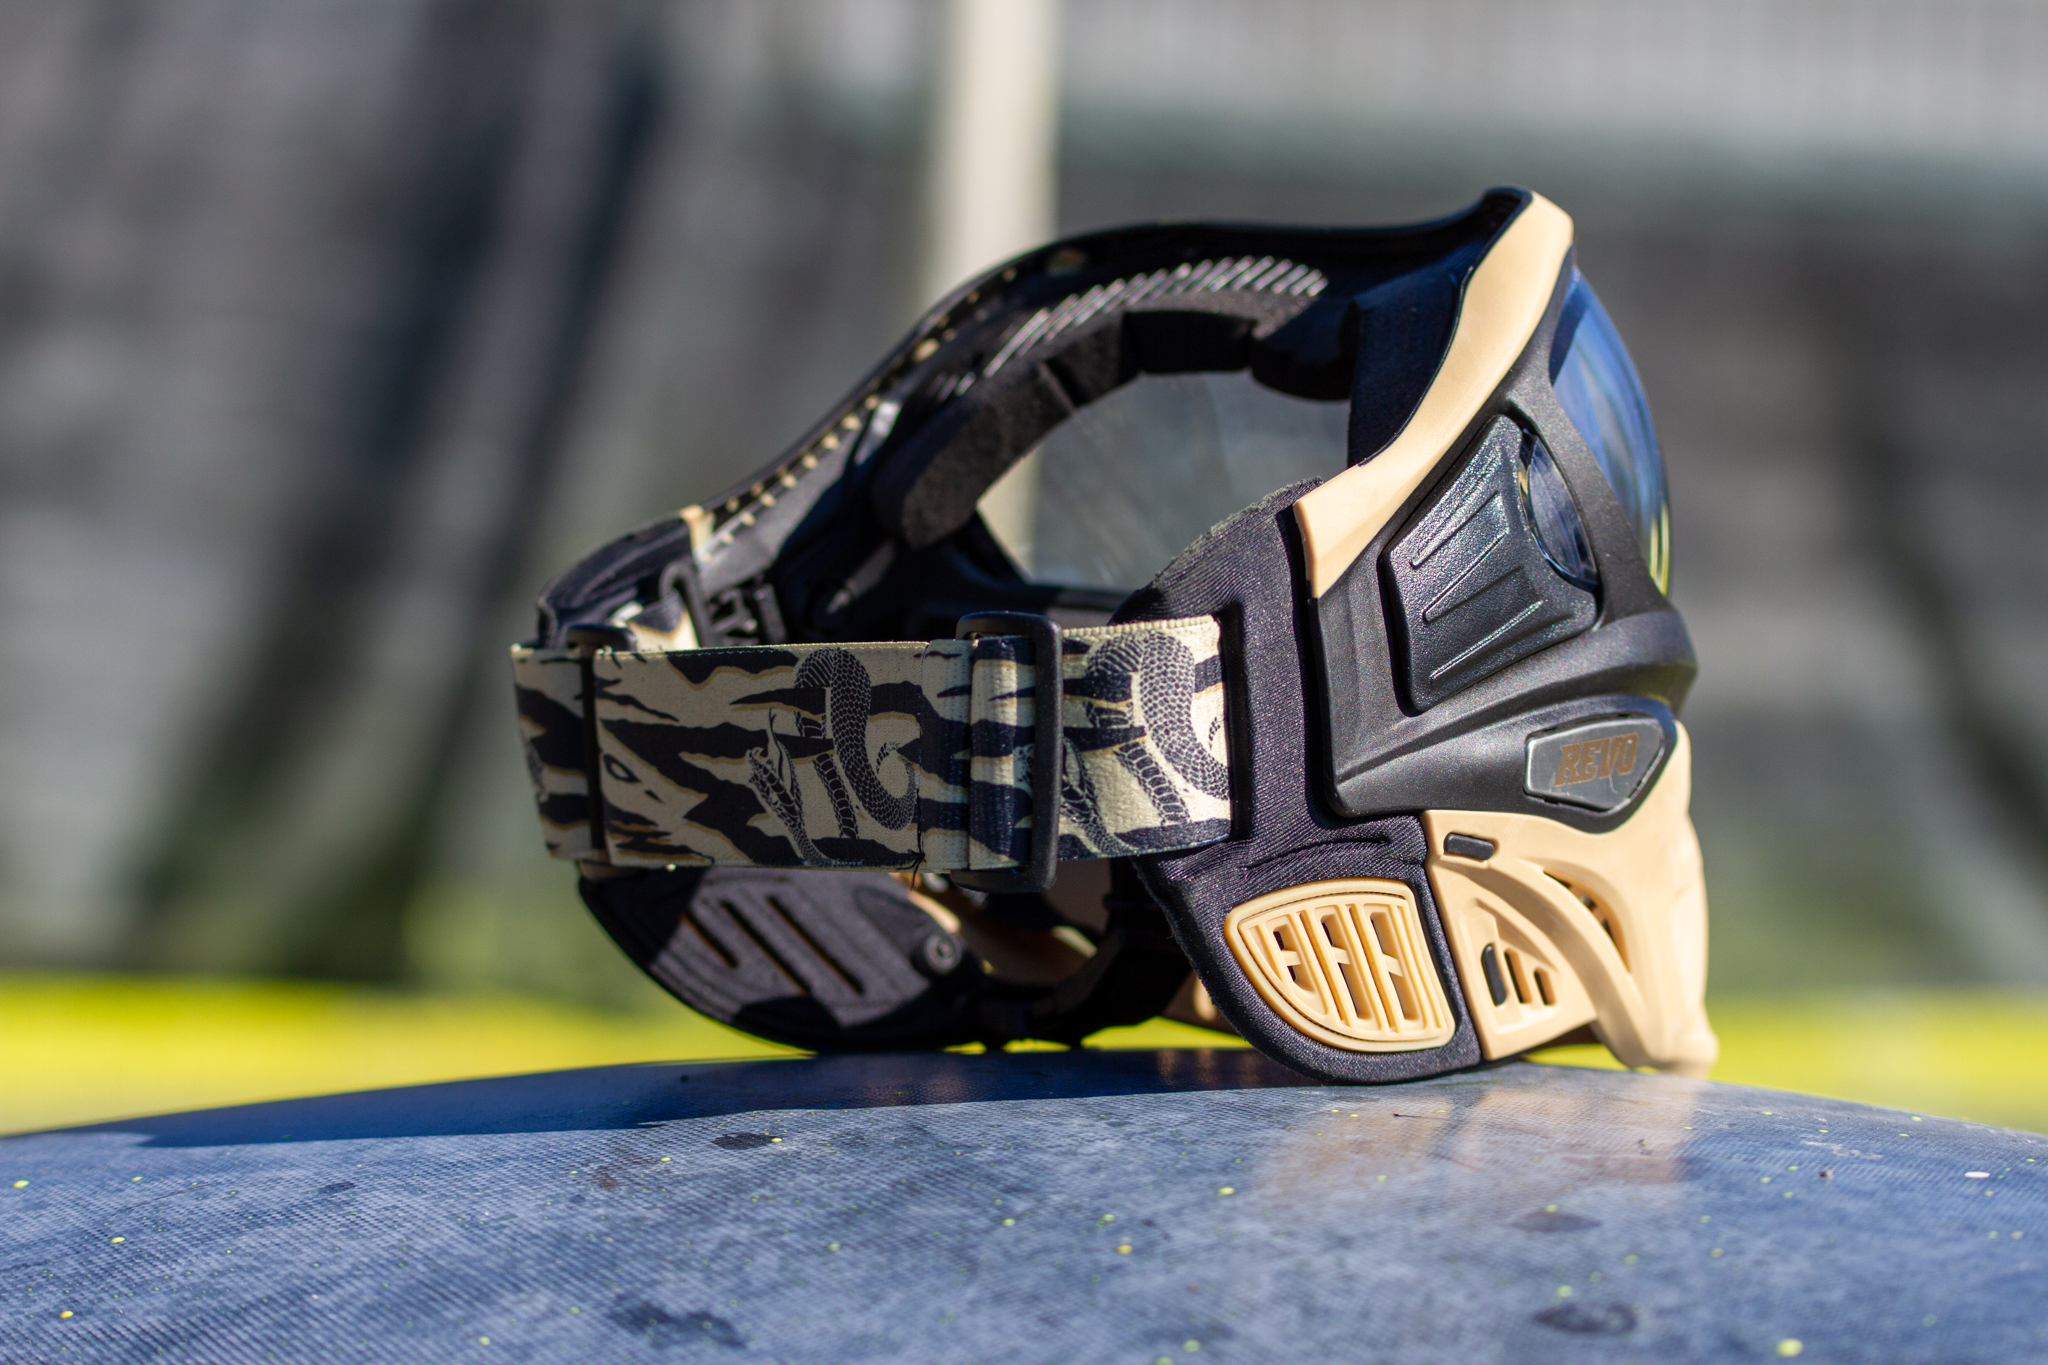 Baltimore Revo Grill 2.0 Mask - 1 of 25 Snakestripe Exclusive 